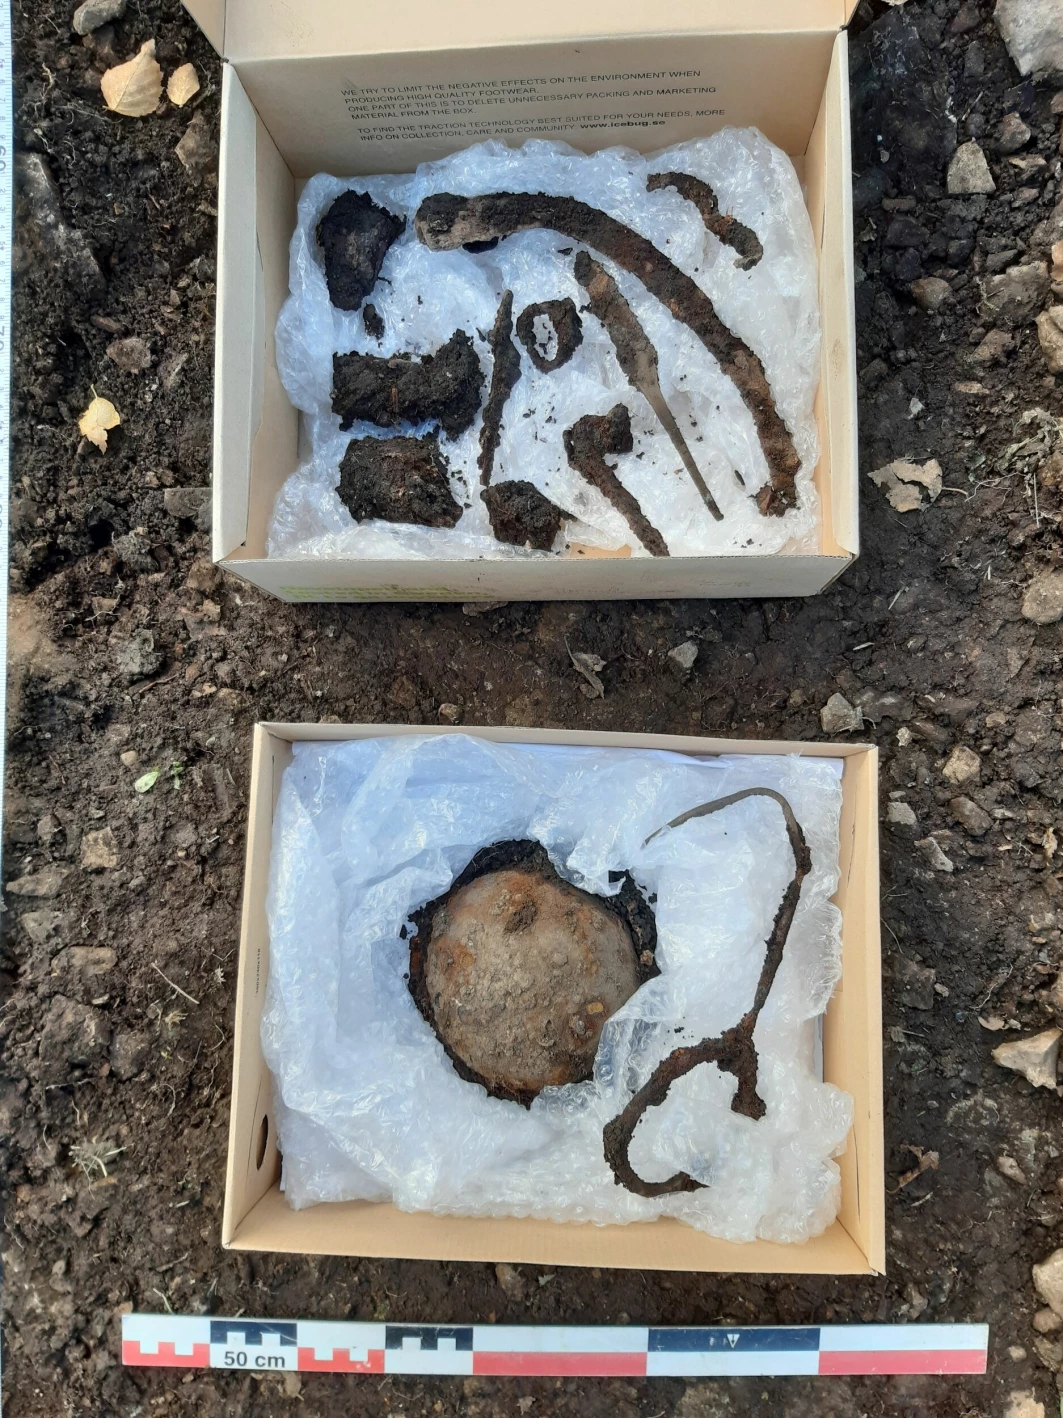 Some of the objects that were dug out from the grave. The box at the bottom contains the remains of the cape brooch with spheres, which helps archaeologists assign a preliminary date to the find. Photo: Byantikvaren in Oslo.